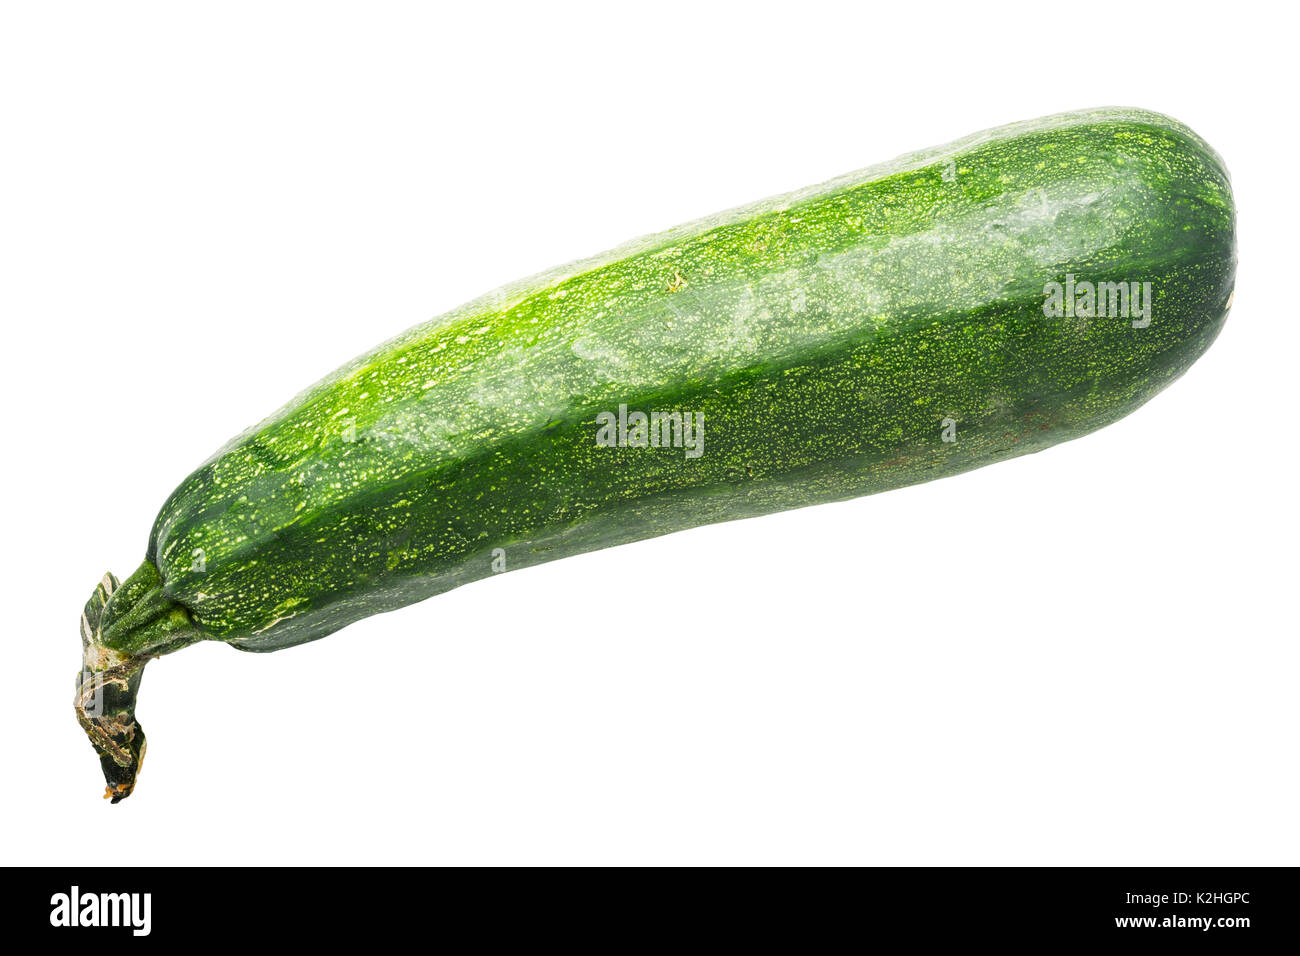 A homegrown organic courgette on a white background Stock Photo